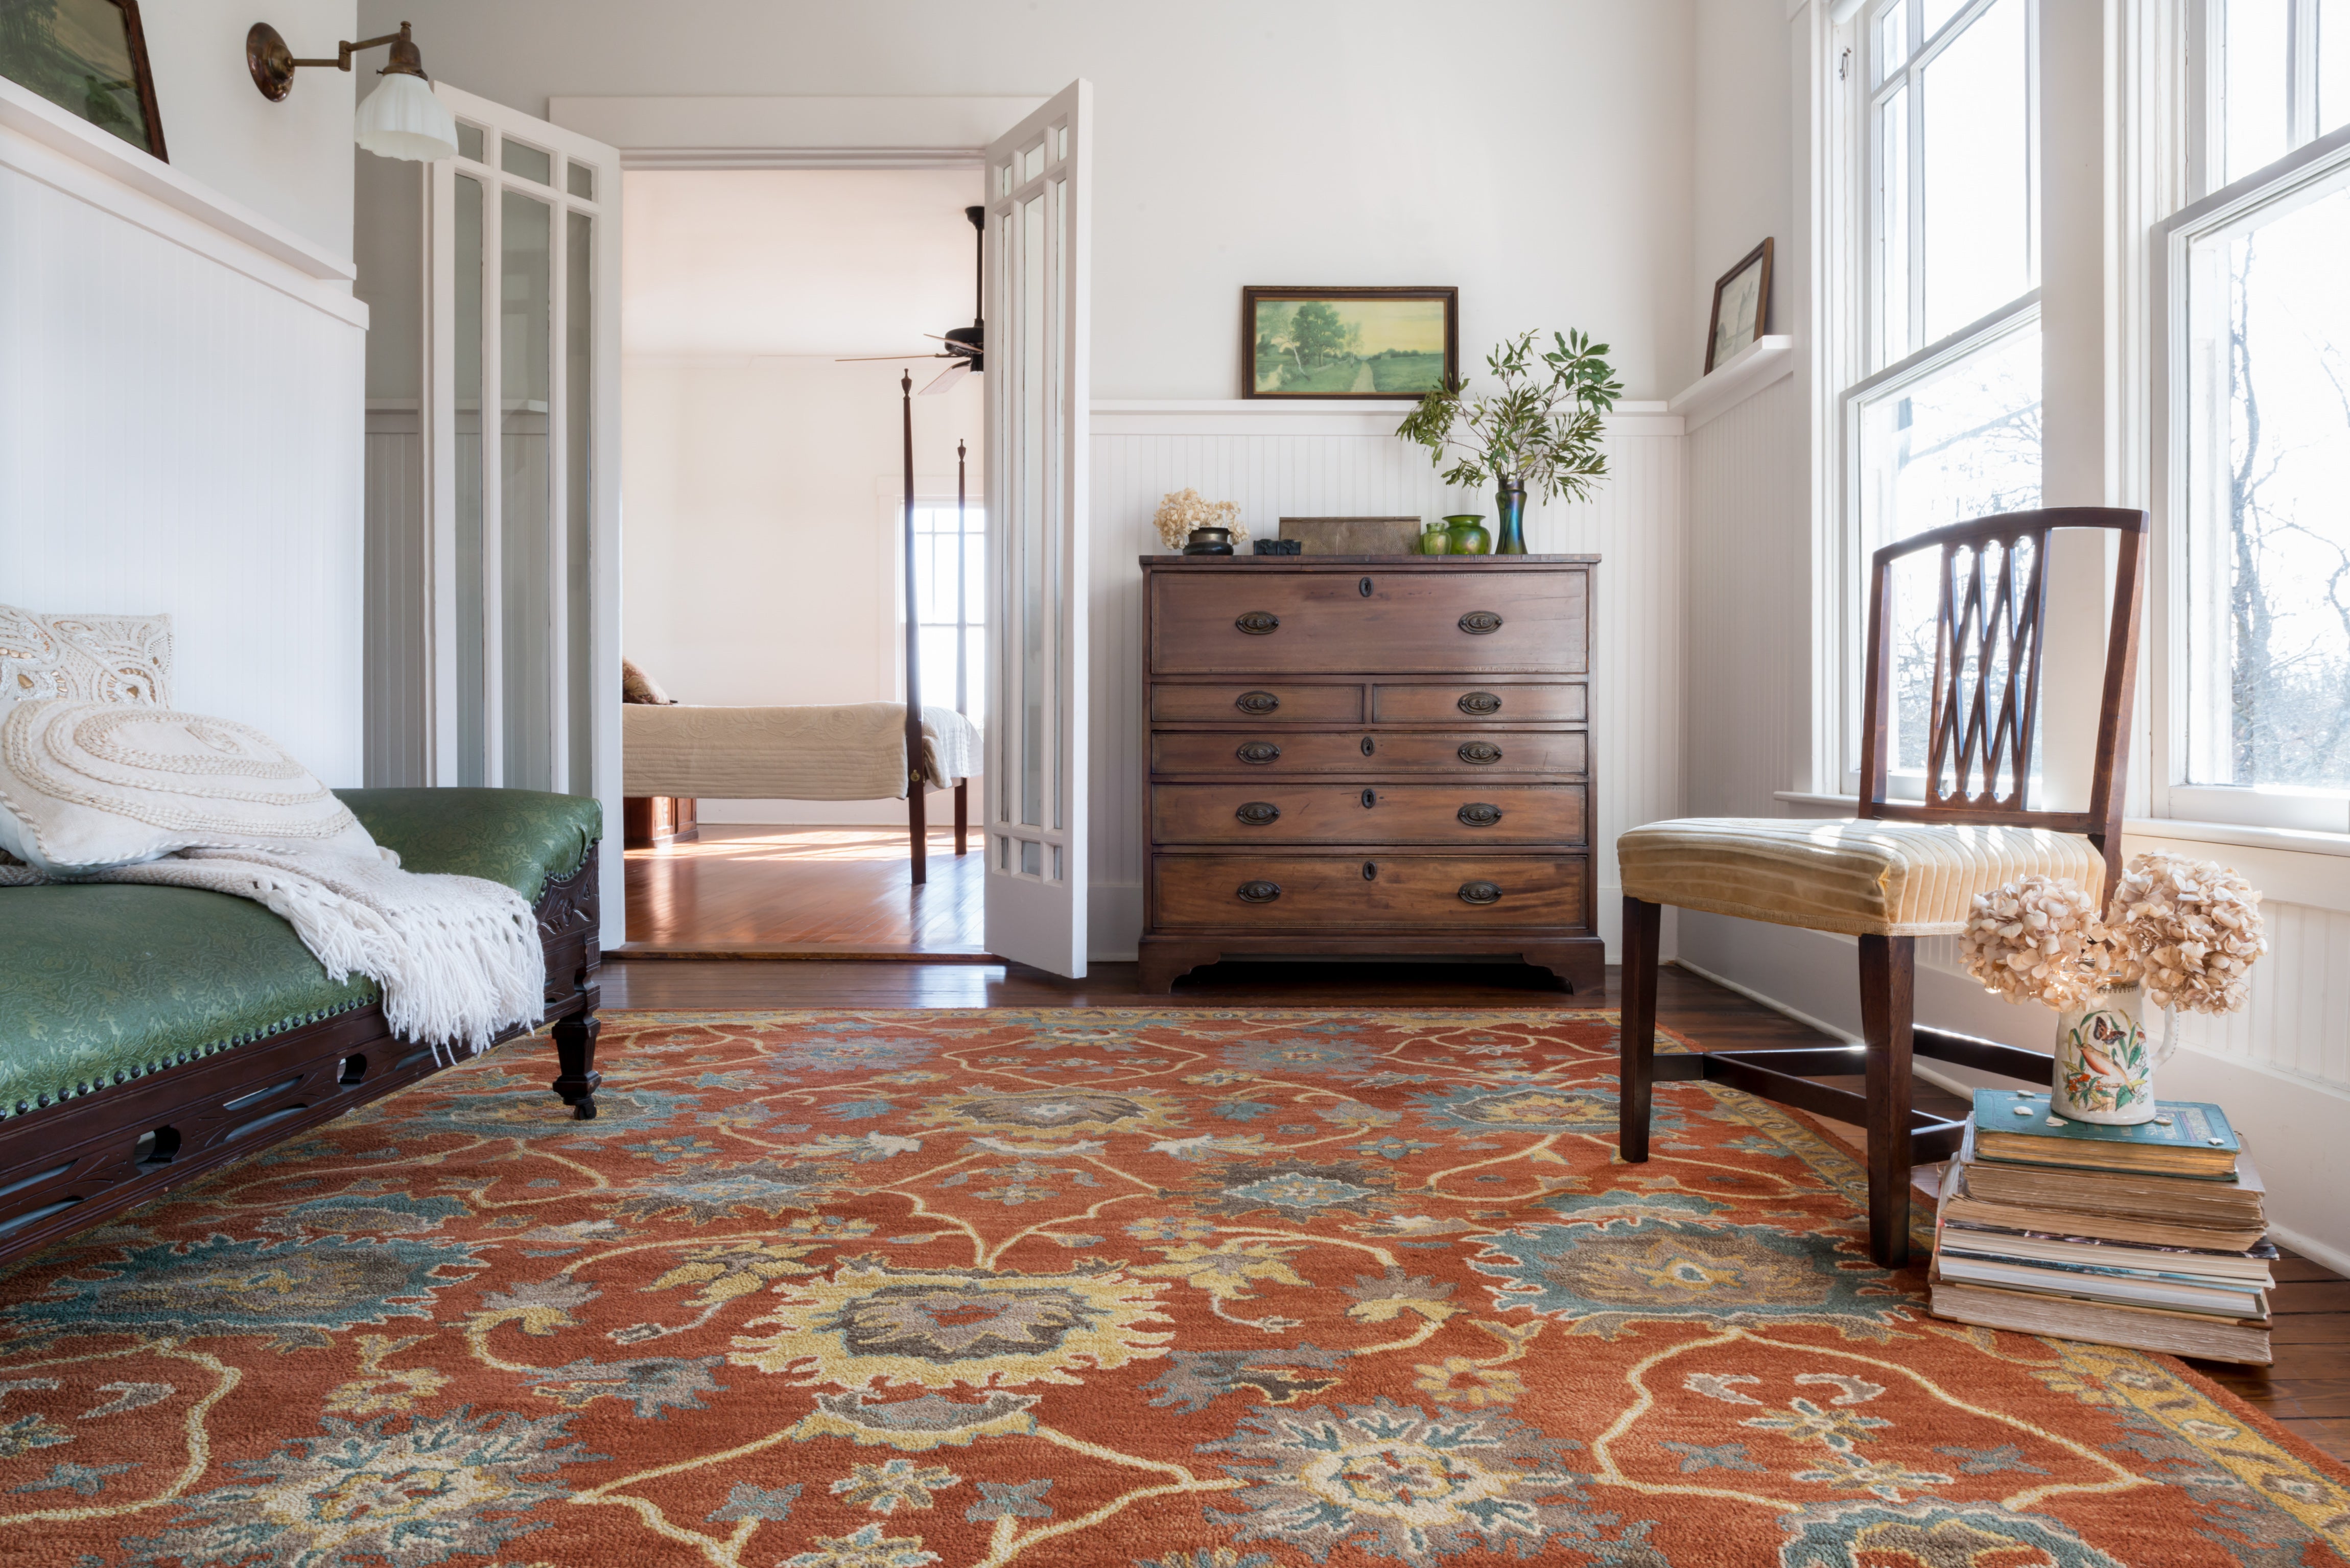 a rust colored traditional rug on the floor of a farmhouse looking bedroom. An antique dresser is against the wall and a green settee is on the left. The room is painted white. 